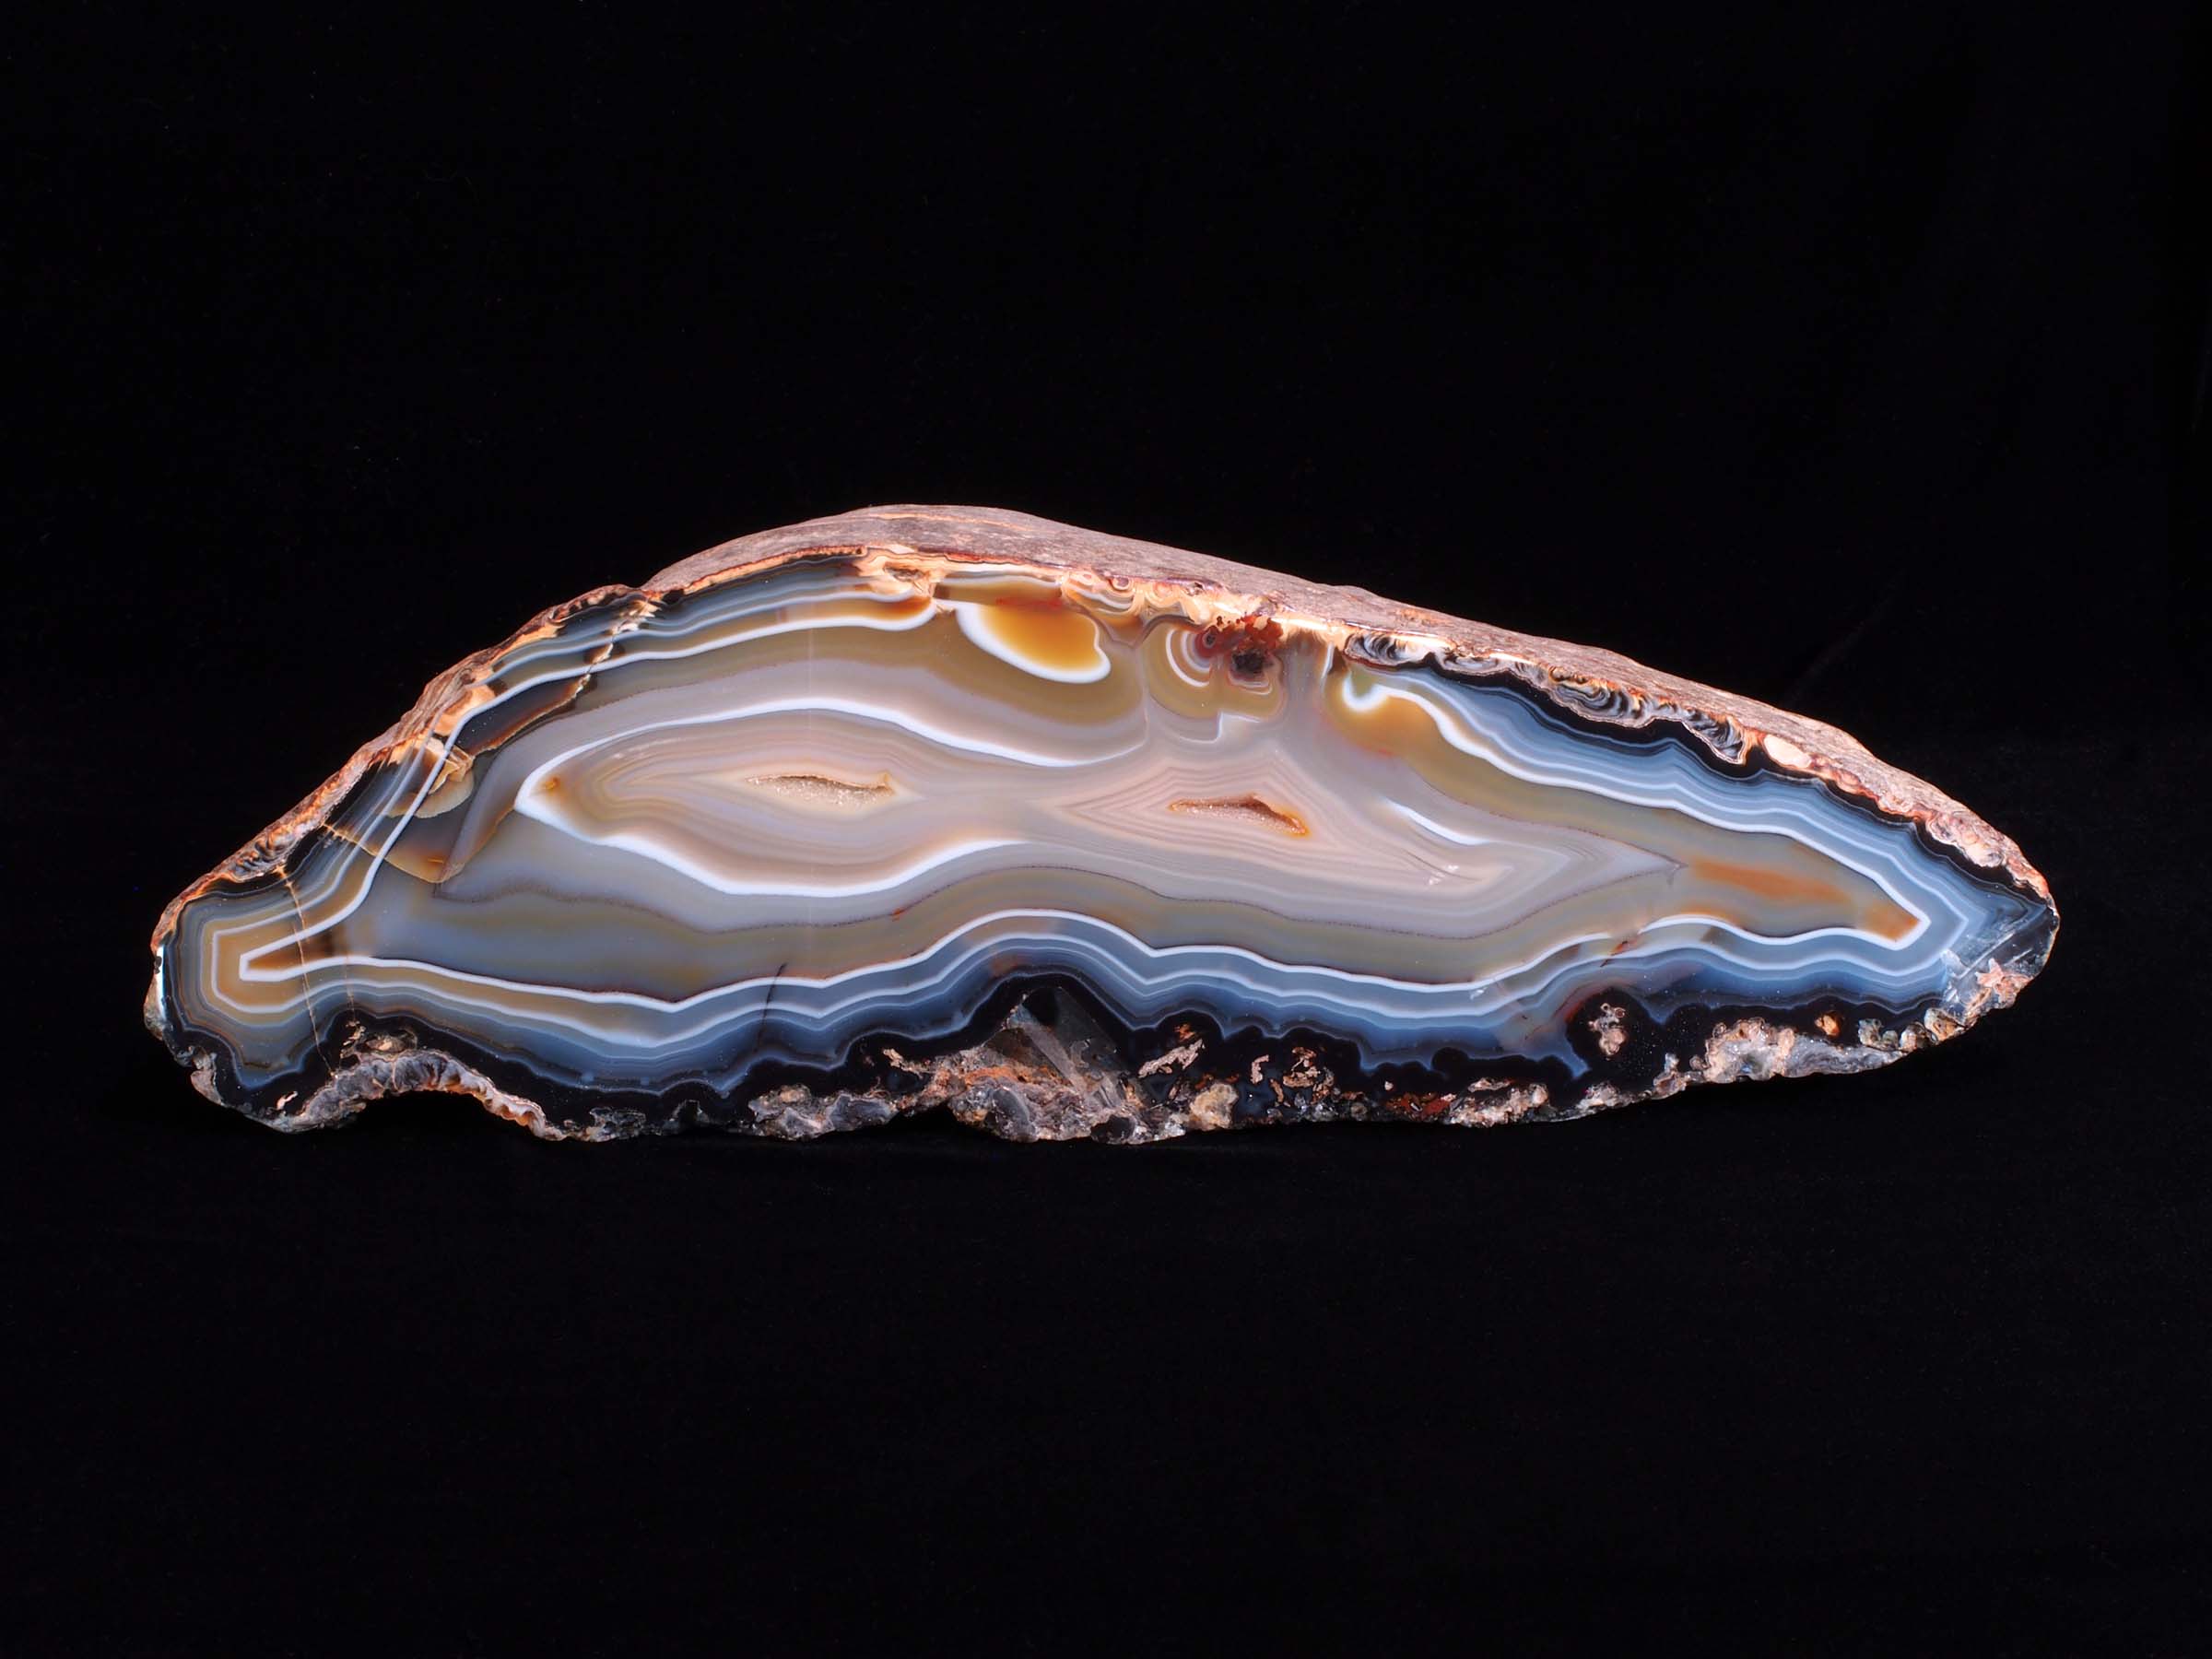 Chacedony - Banded Agate